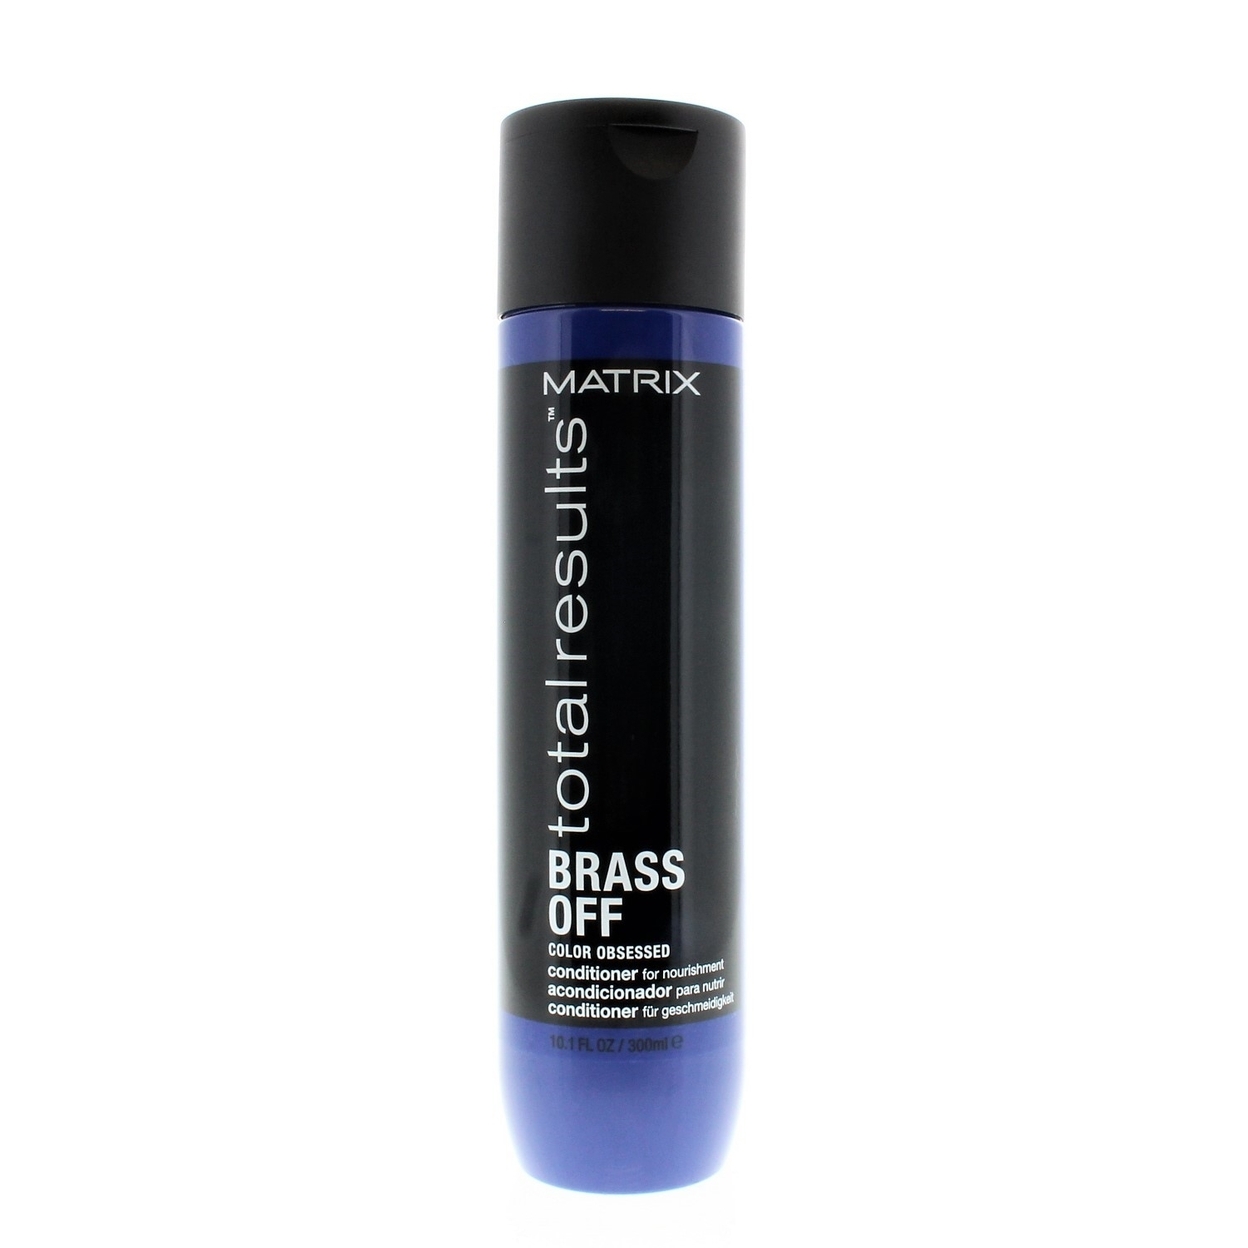 Matrix Total Results Brass Off Color Obsessed Conditioner 10.1oz/300ml